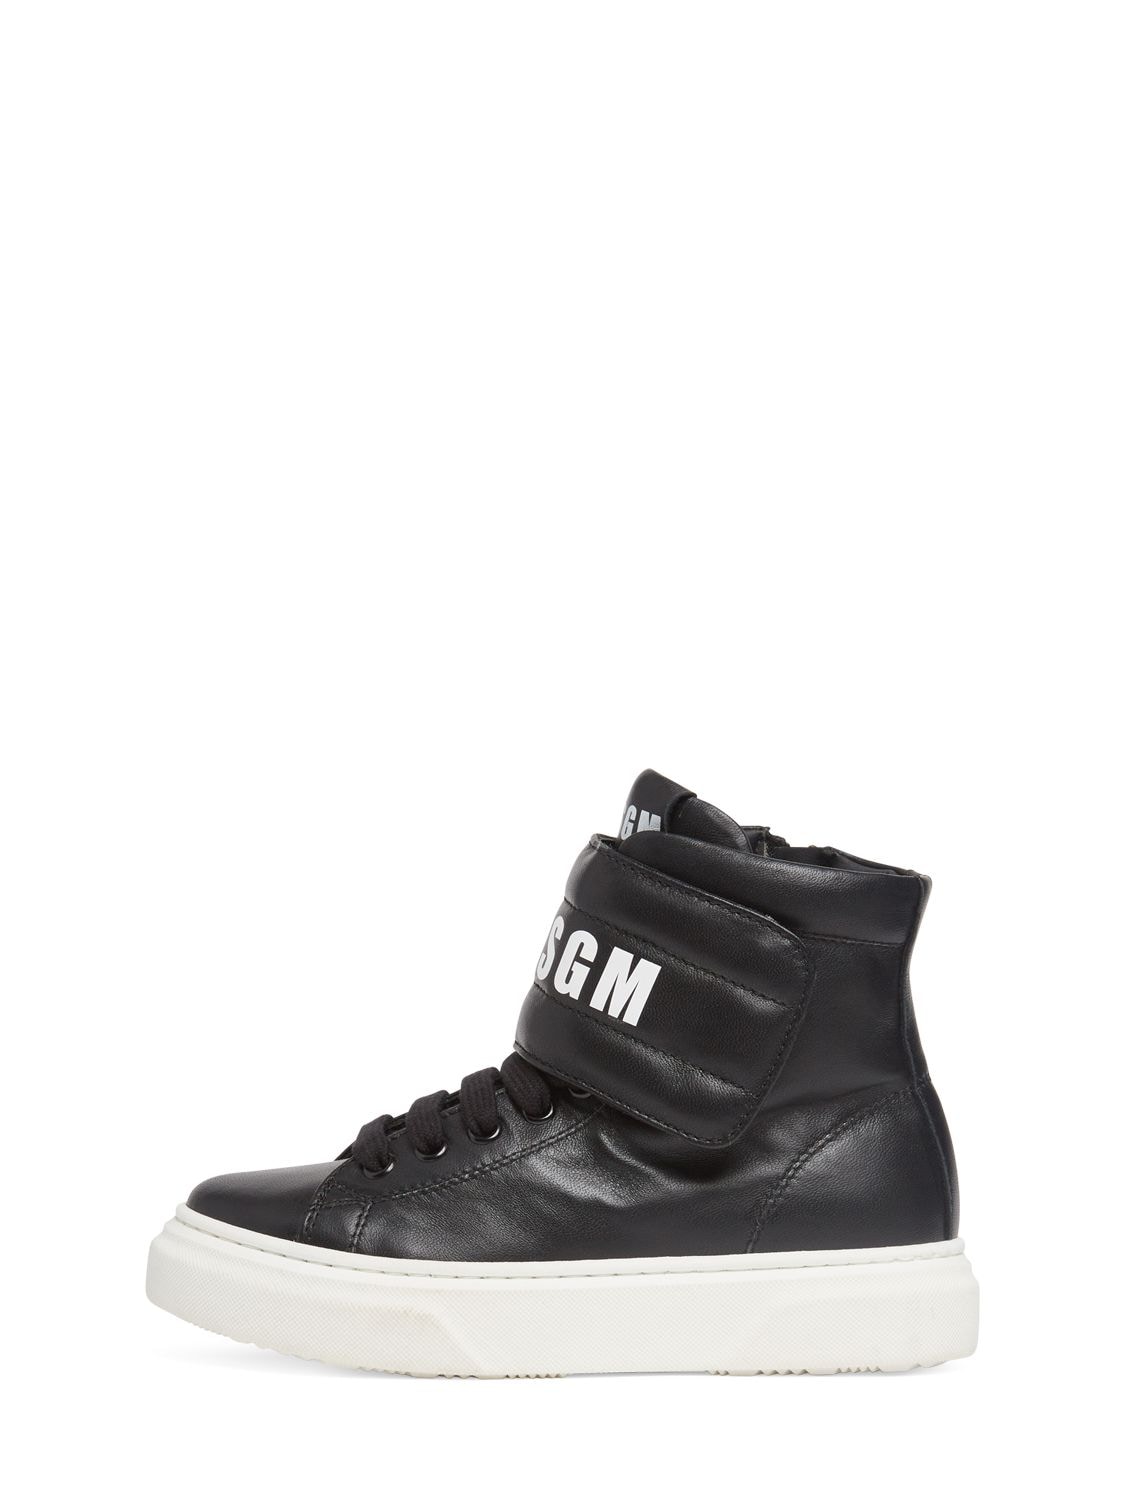 Msgm Kids' Leather High Sneakers W/ Printed Logos In Black